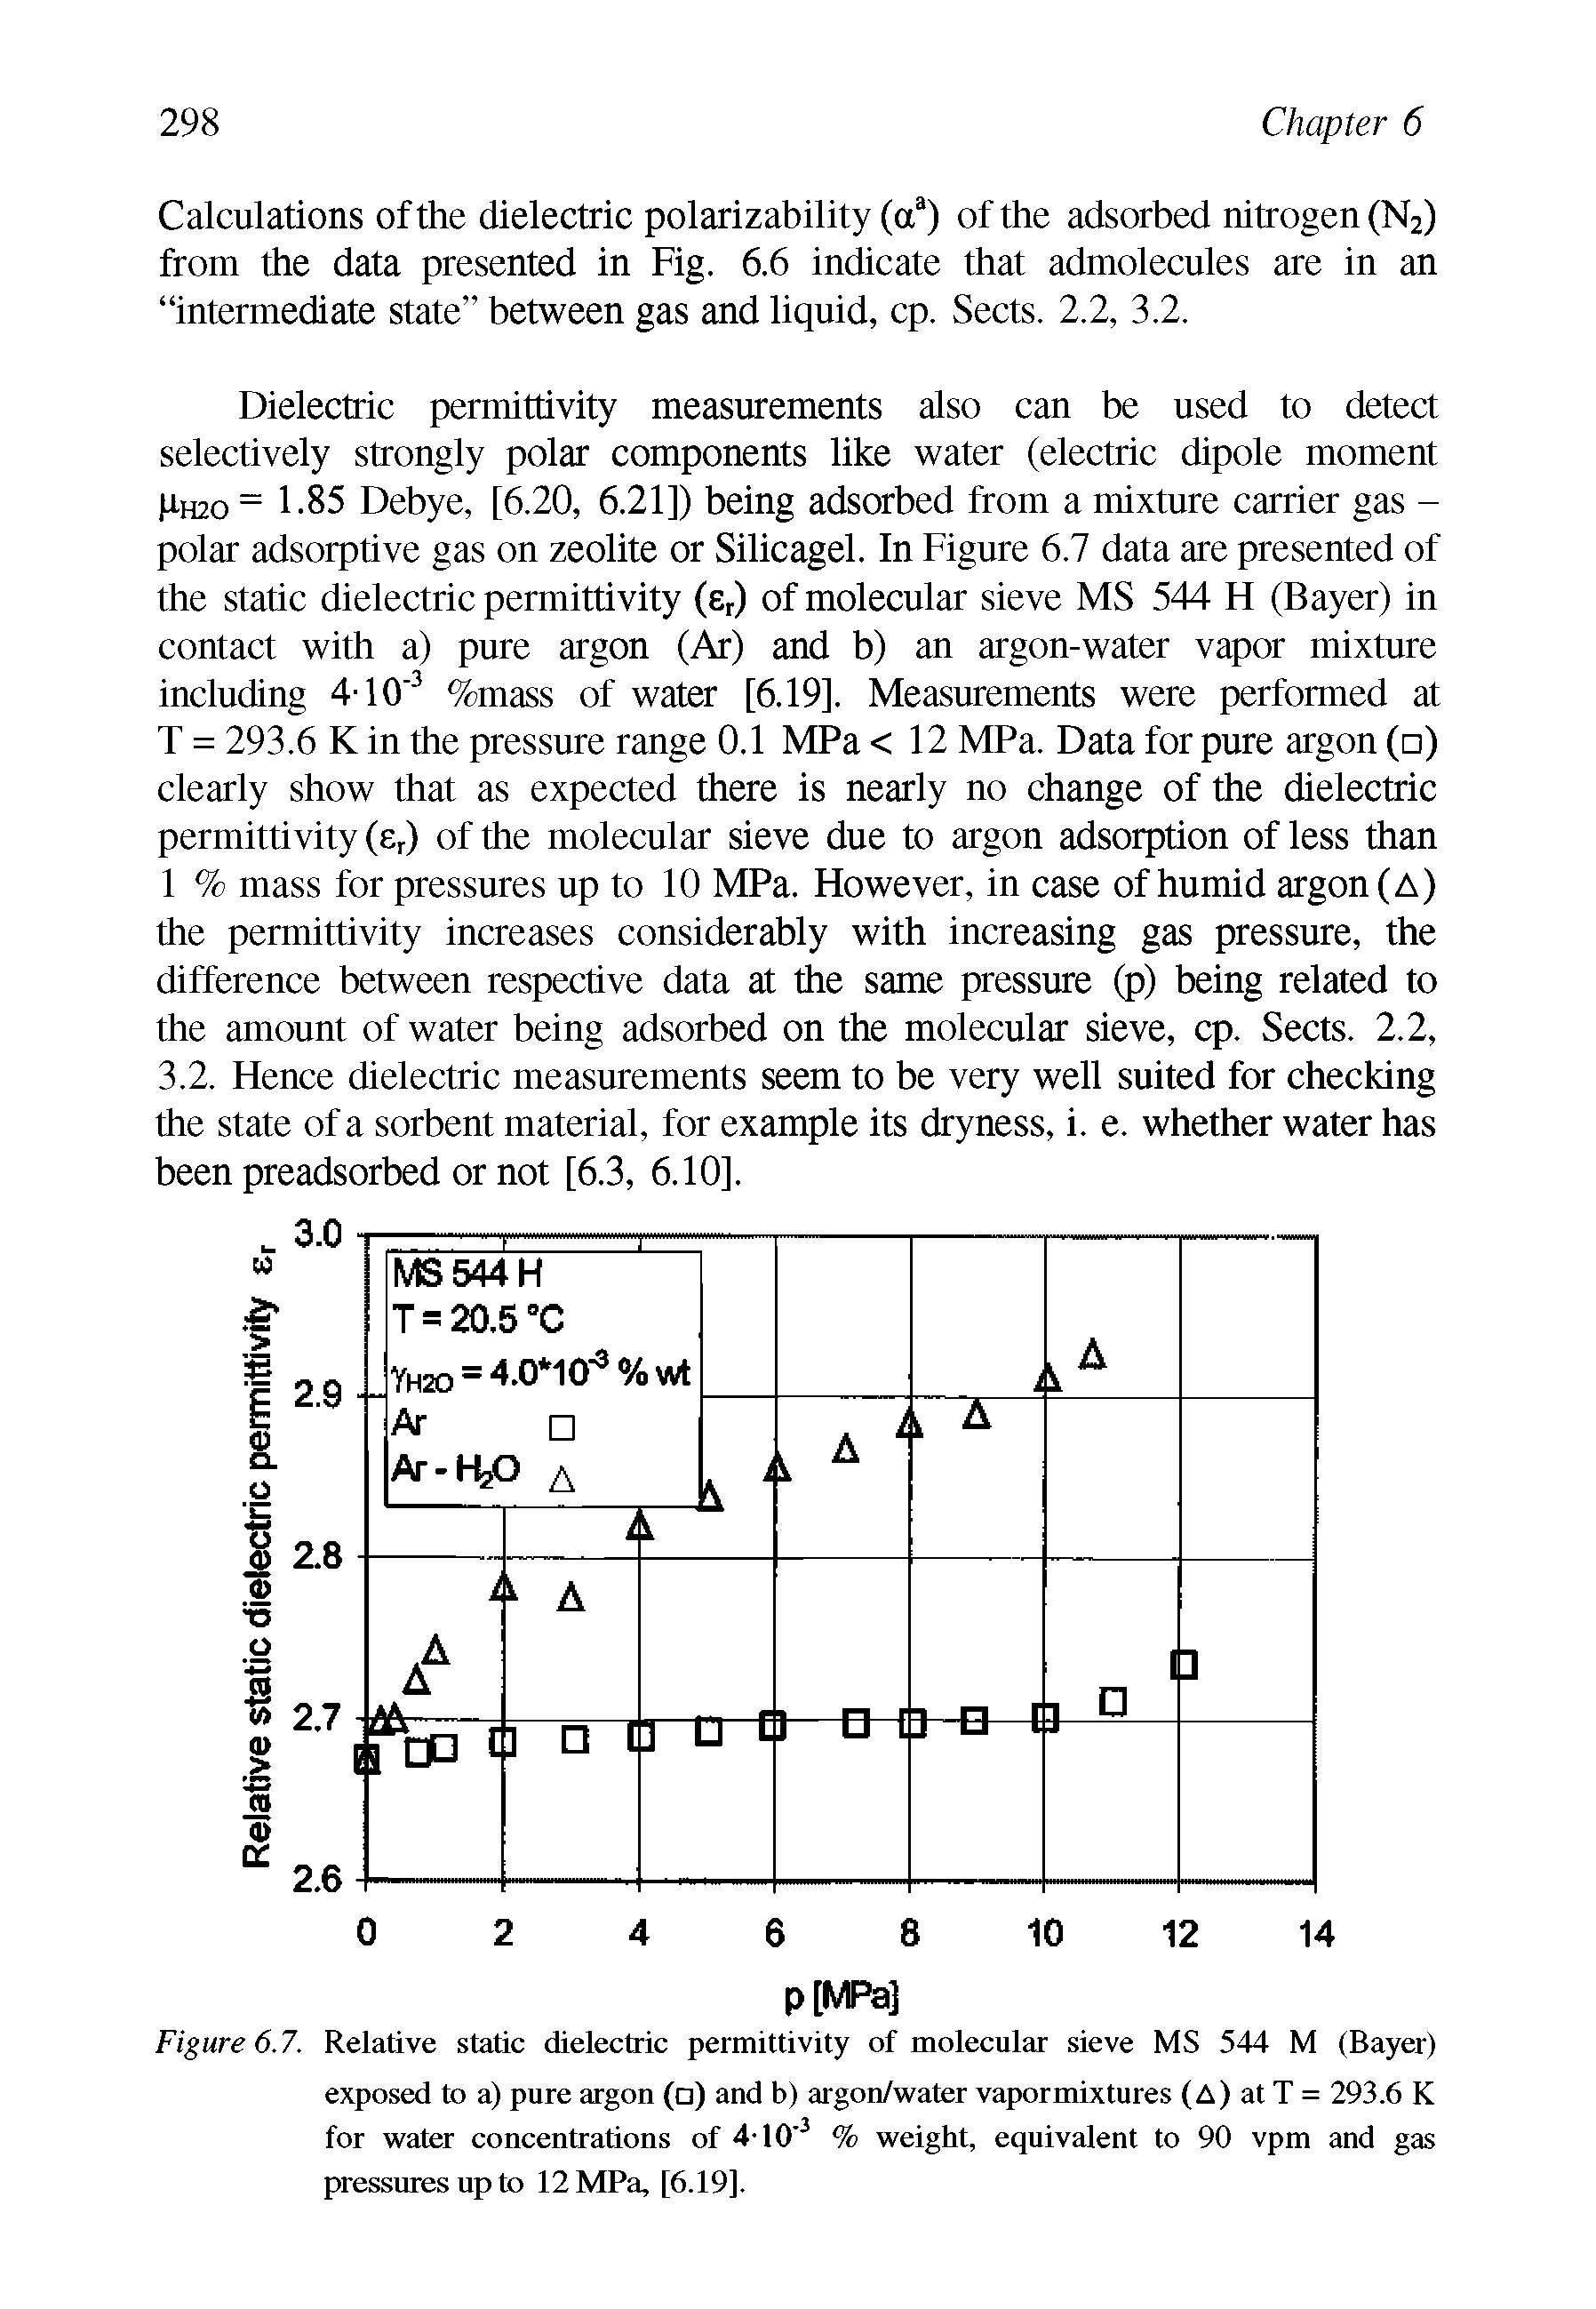 Figure 6.7. Relative static dielectric permittivity of molecular sieve MS 544 M (Bayer) exposed to a) pure argon ( ) and b) argon/water vapormixtures (A) at T = 293.6 K for water concentrations of 4-10 % weight, equivalent to 90 vpm and gas pressures up to 12 MPa, [6.19].